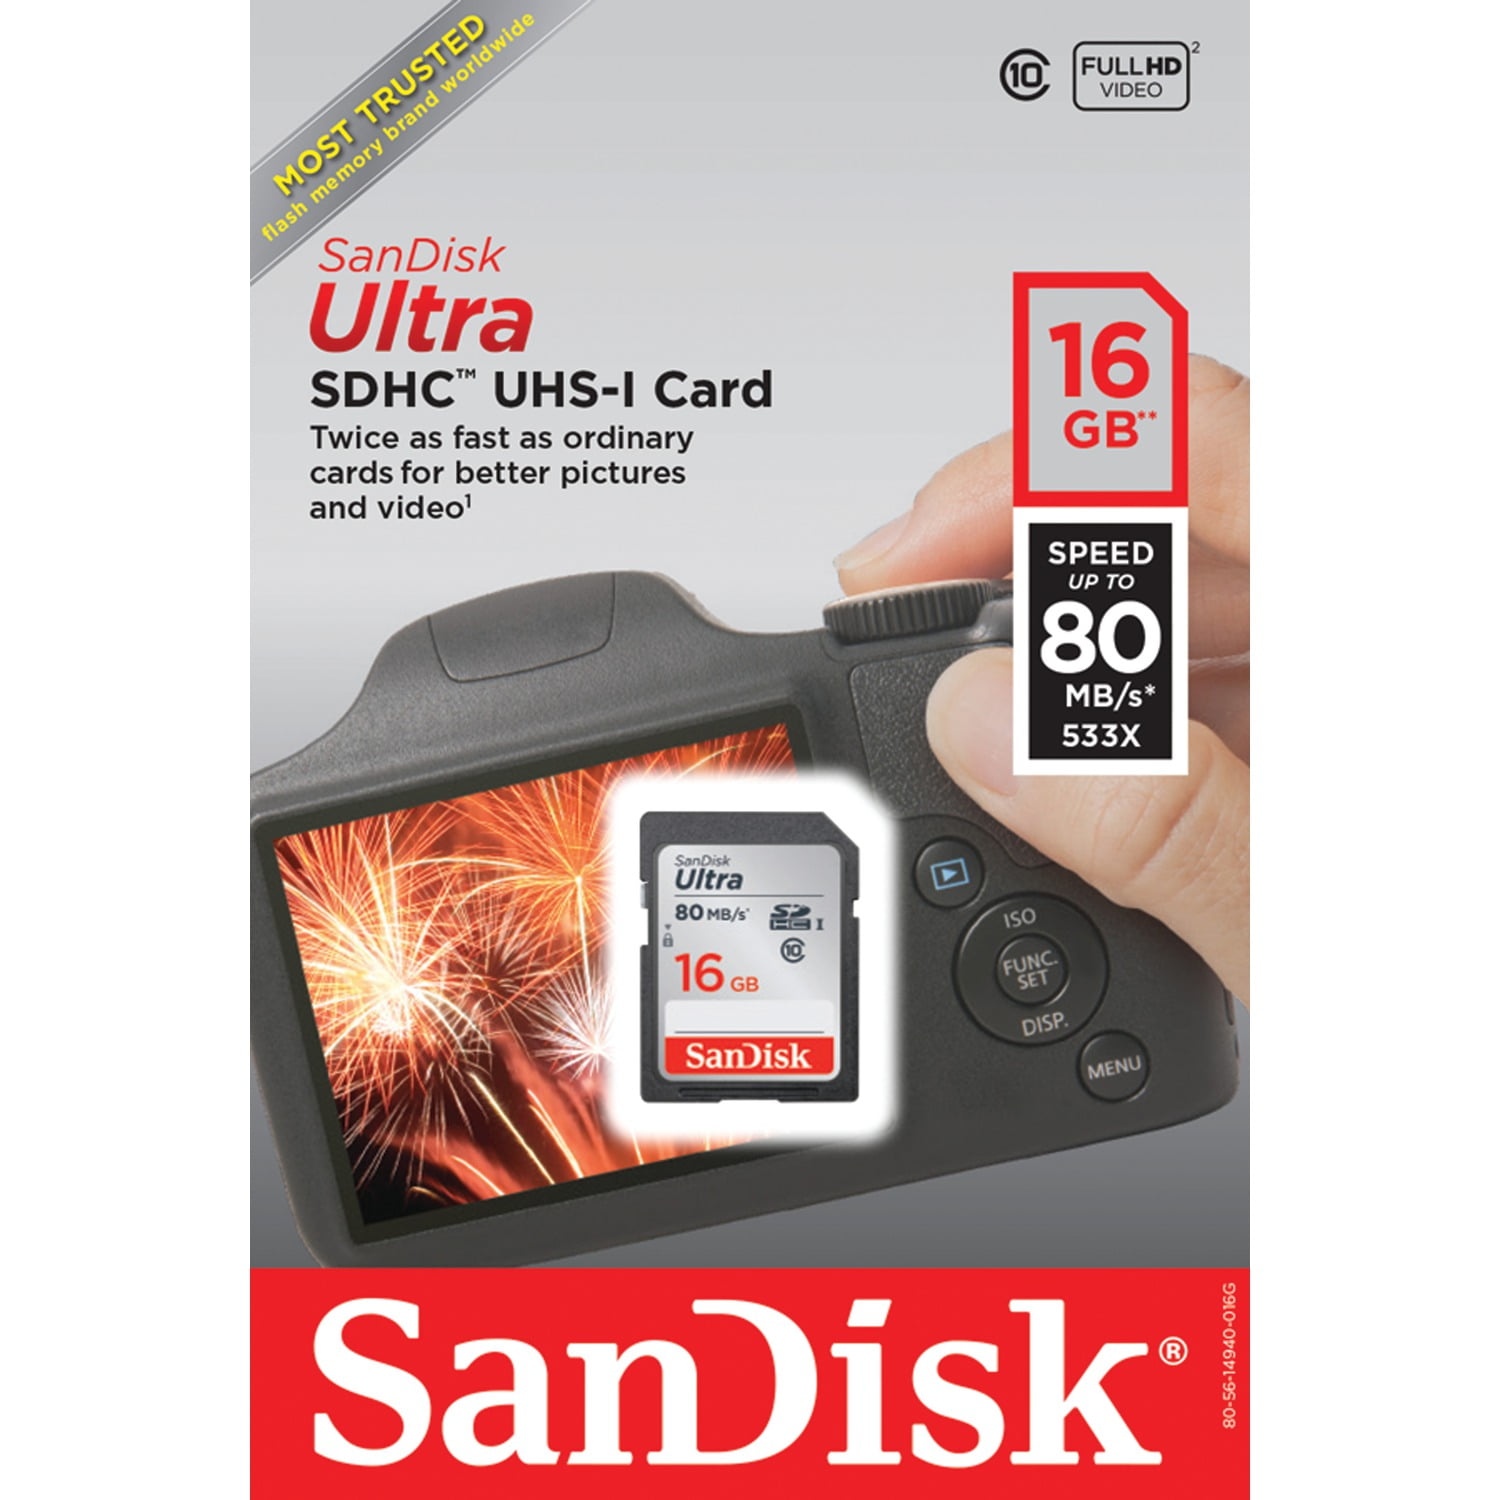 Sandisk 16GB SD SDHC Memory Card Class 4 for Digital Camera Picture HD Video NEW 